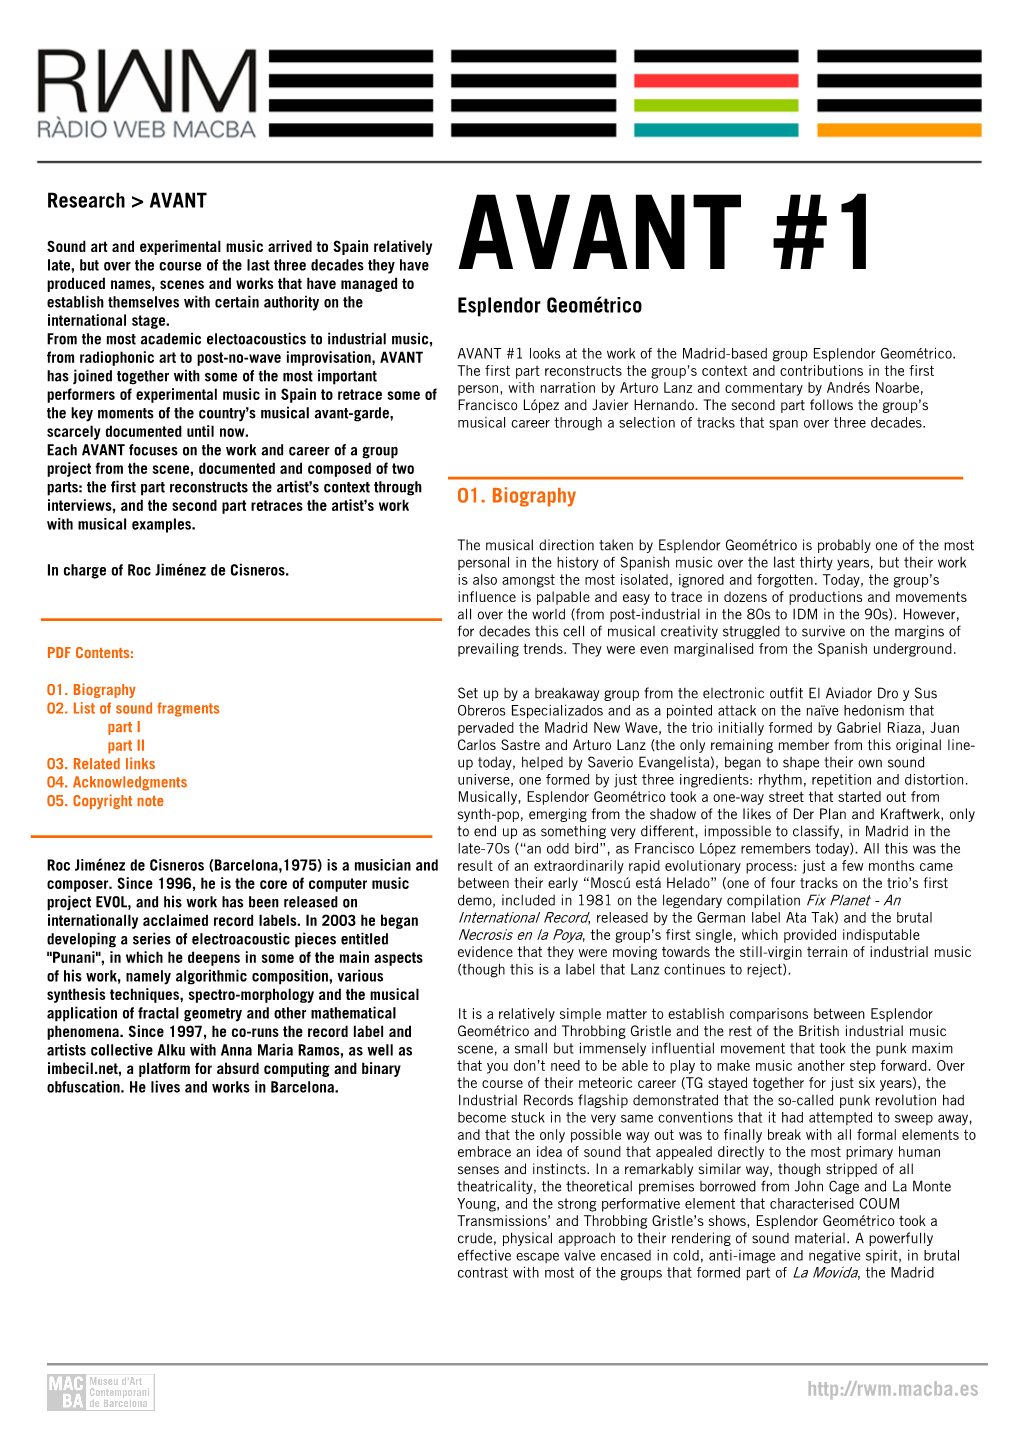 AVANT #1 Produced Names, Scenes and Works That Have Managed to Establish Themselves with Certain Authority on the Esplendor Geométrico International Stage